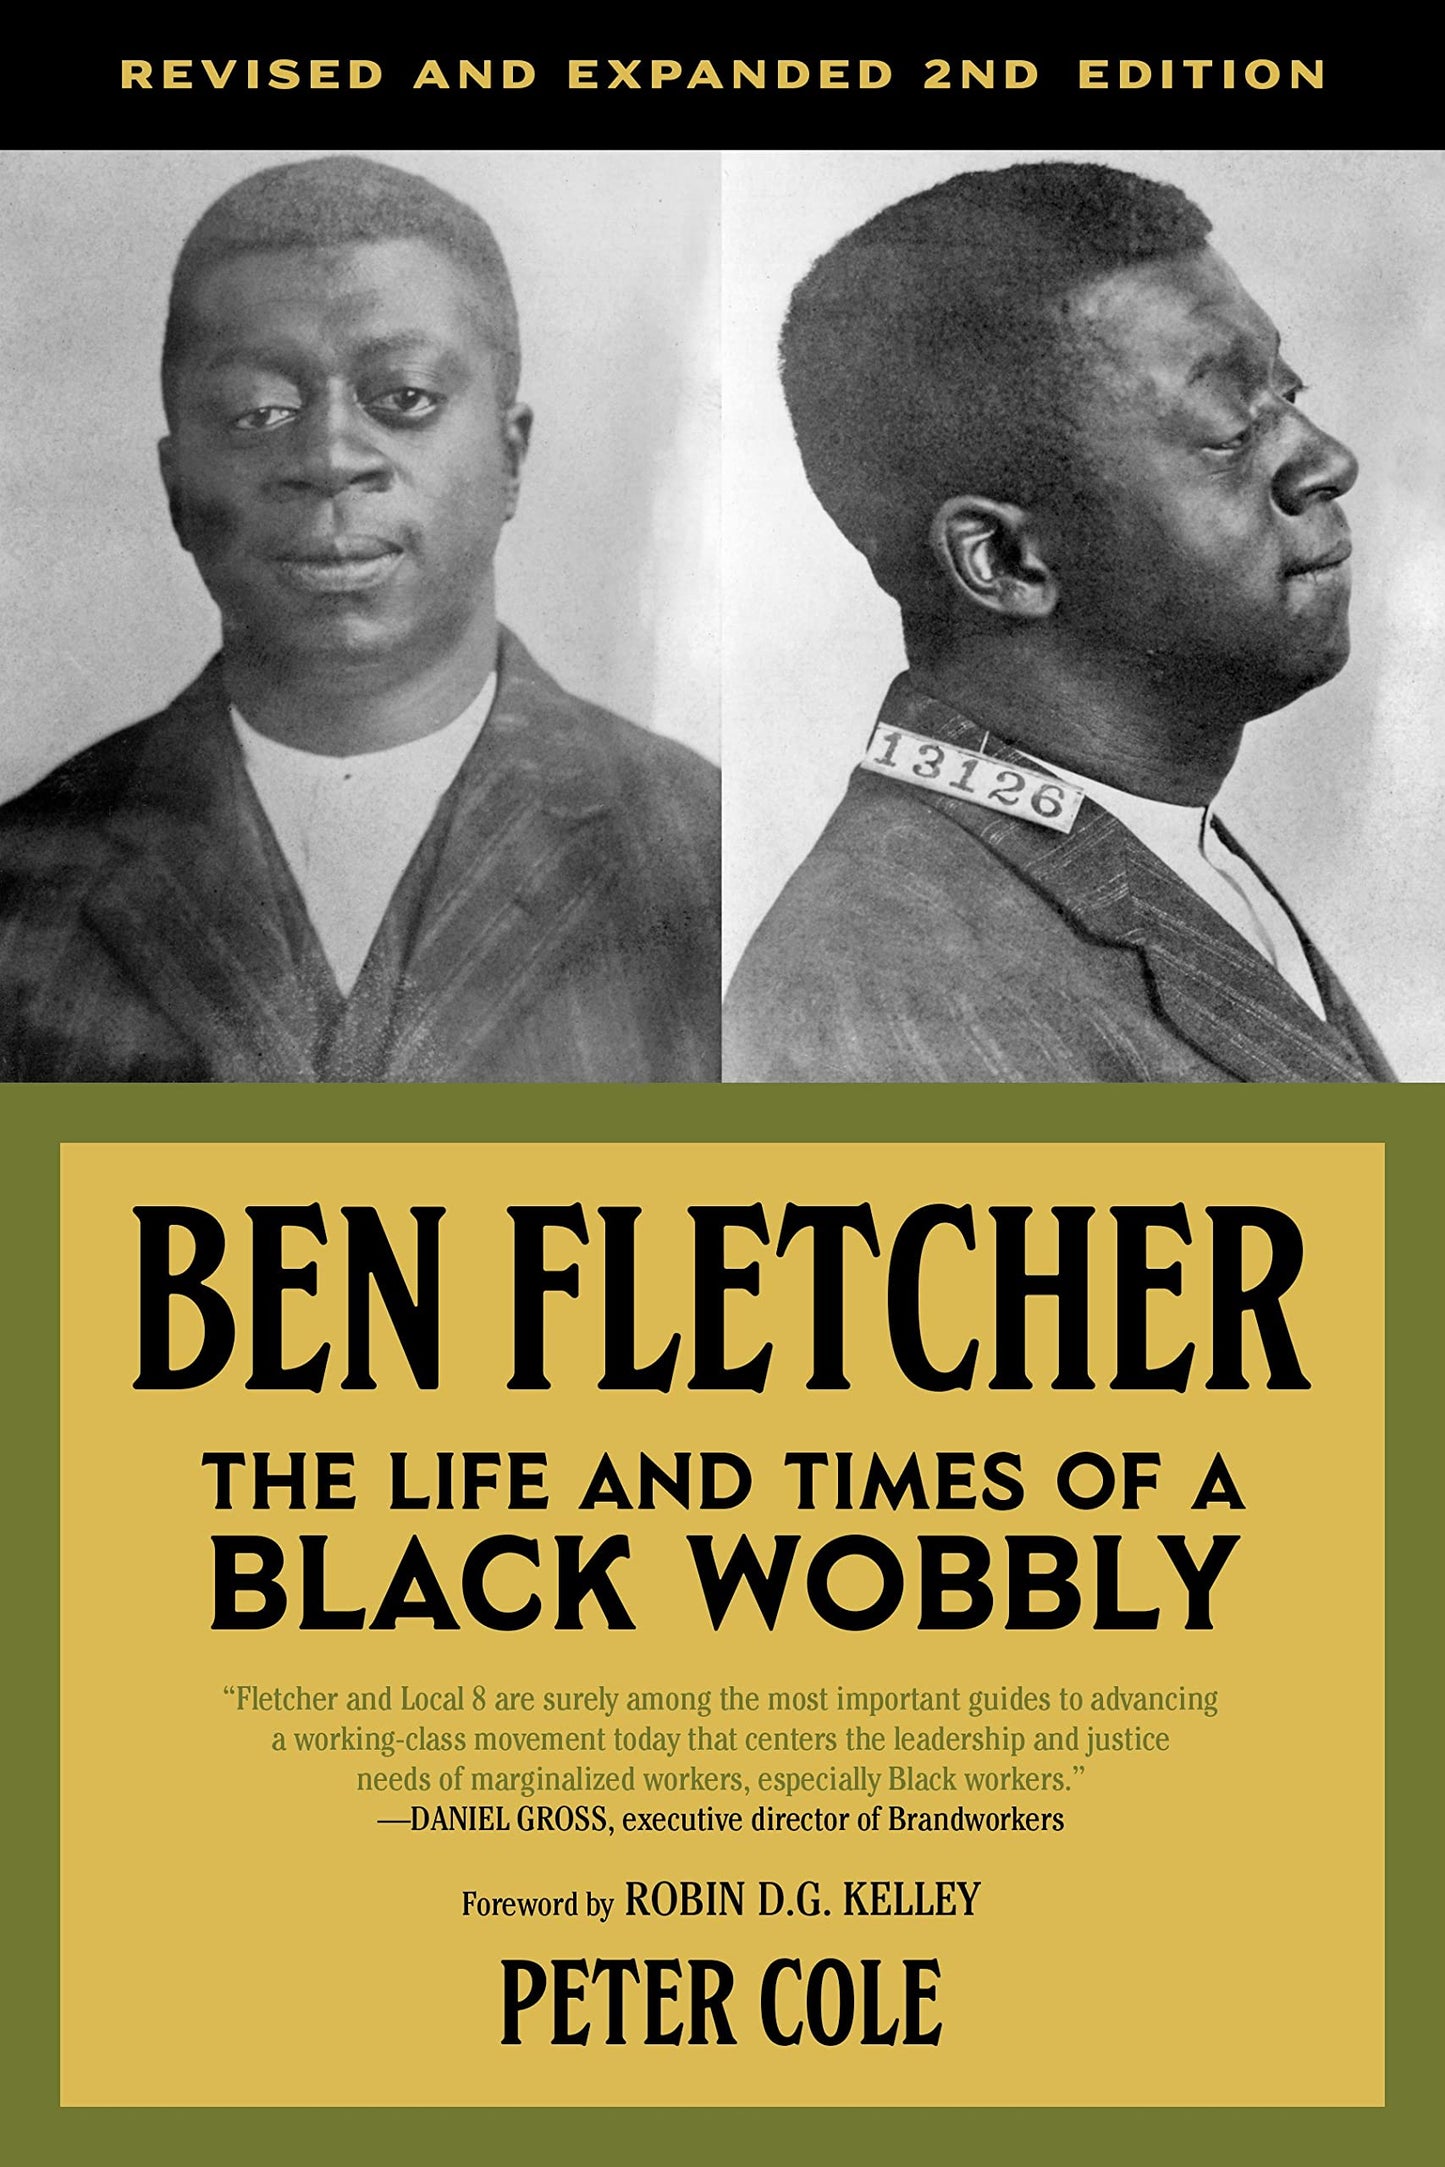 Ben Fletcher // The Life and Times of a Black Wobbly